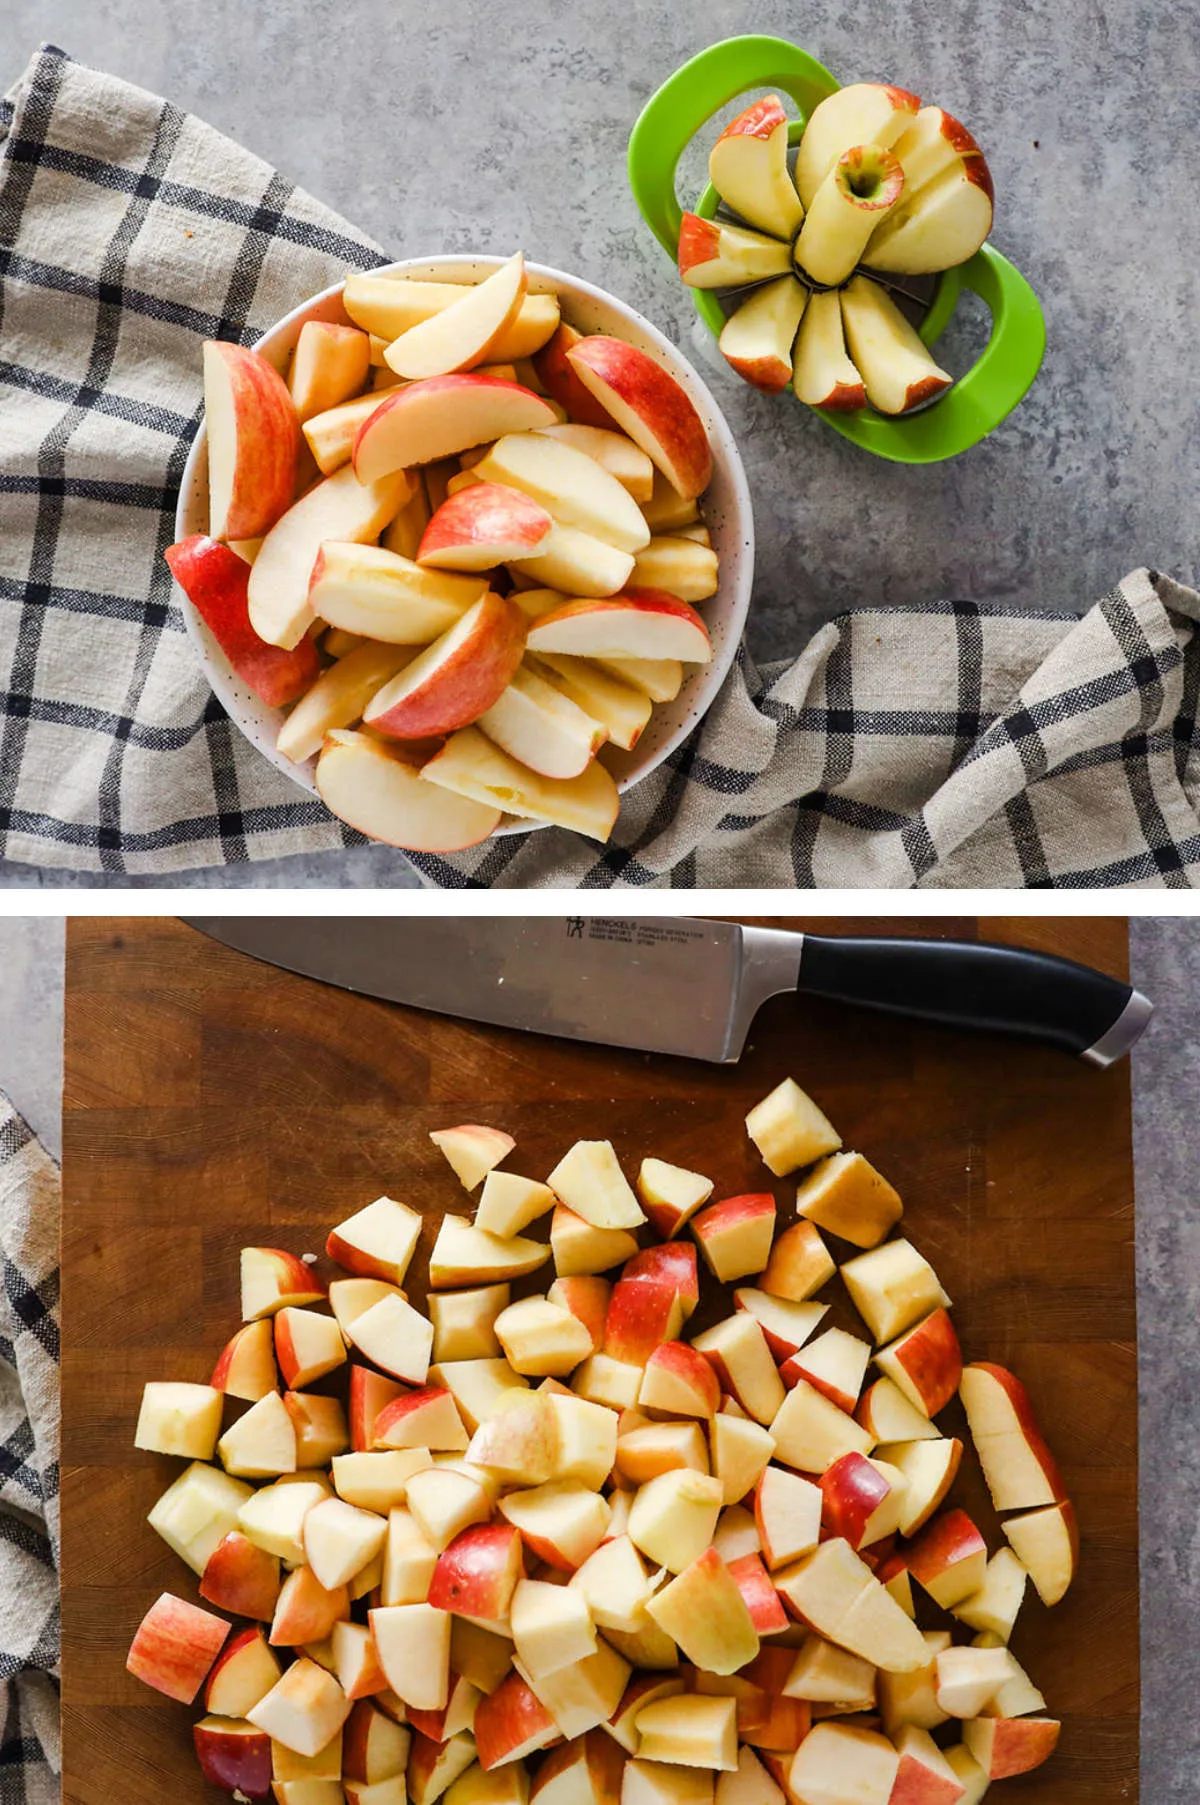 Two overhead images in one: 1. Sliced apple wedges in a bowl on a hand towel. A round apple slicer sits to the side with another sliced apple inside it. 2. The apple wedges are now on a cutting board and have been chopped into bite-sized pieces with a chef knife. 